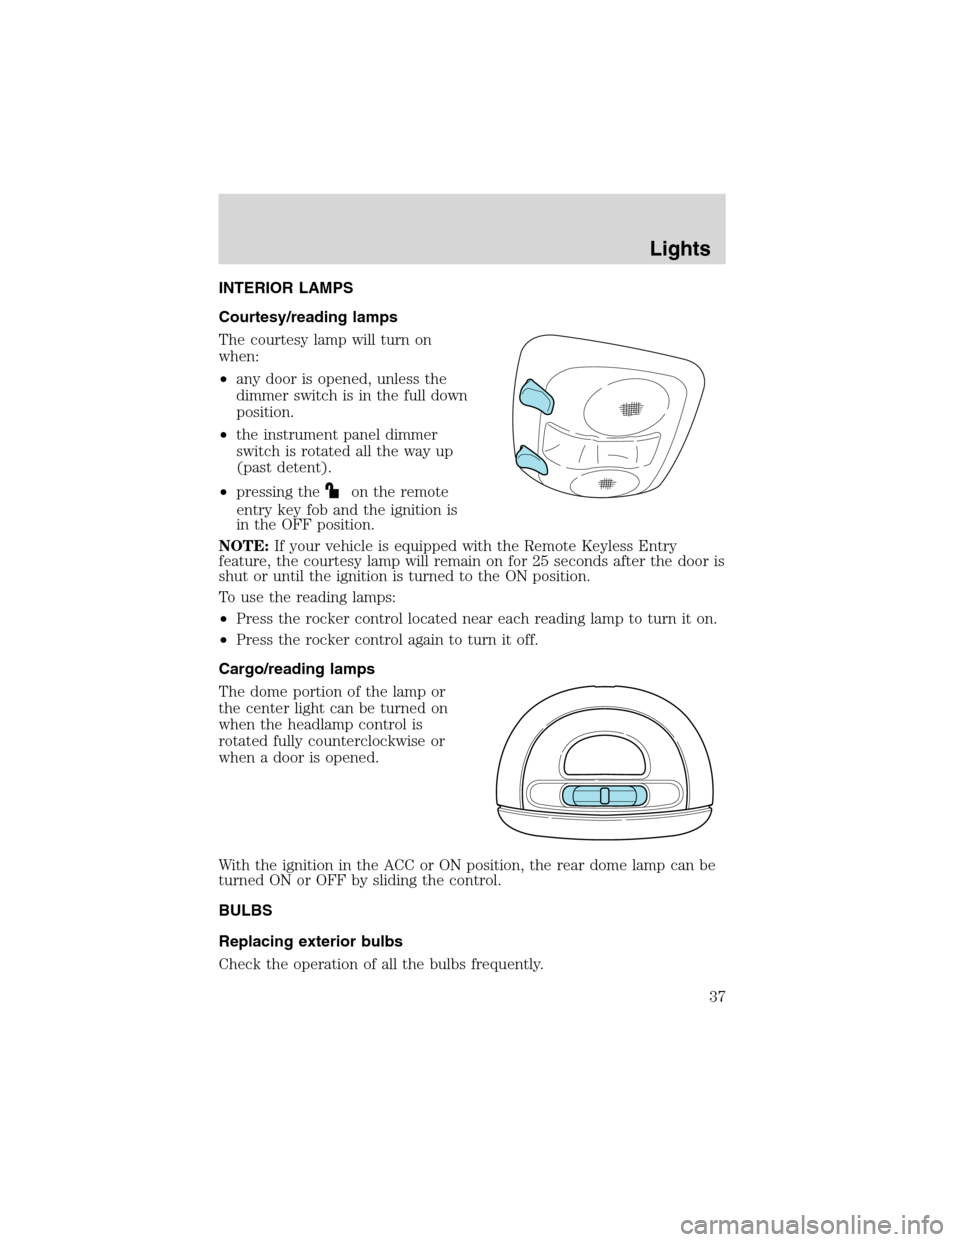 FORD EXPLORER 2003 3.G Owners Manual INTERIOR LAMPS
Courtesy/reading lamps
The courtesy lamp will turn on
when:
•any door is opened, unless the
dimmer switch is in the full down
position.
•the instrument panel dimmer
switch is rotate